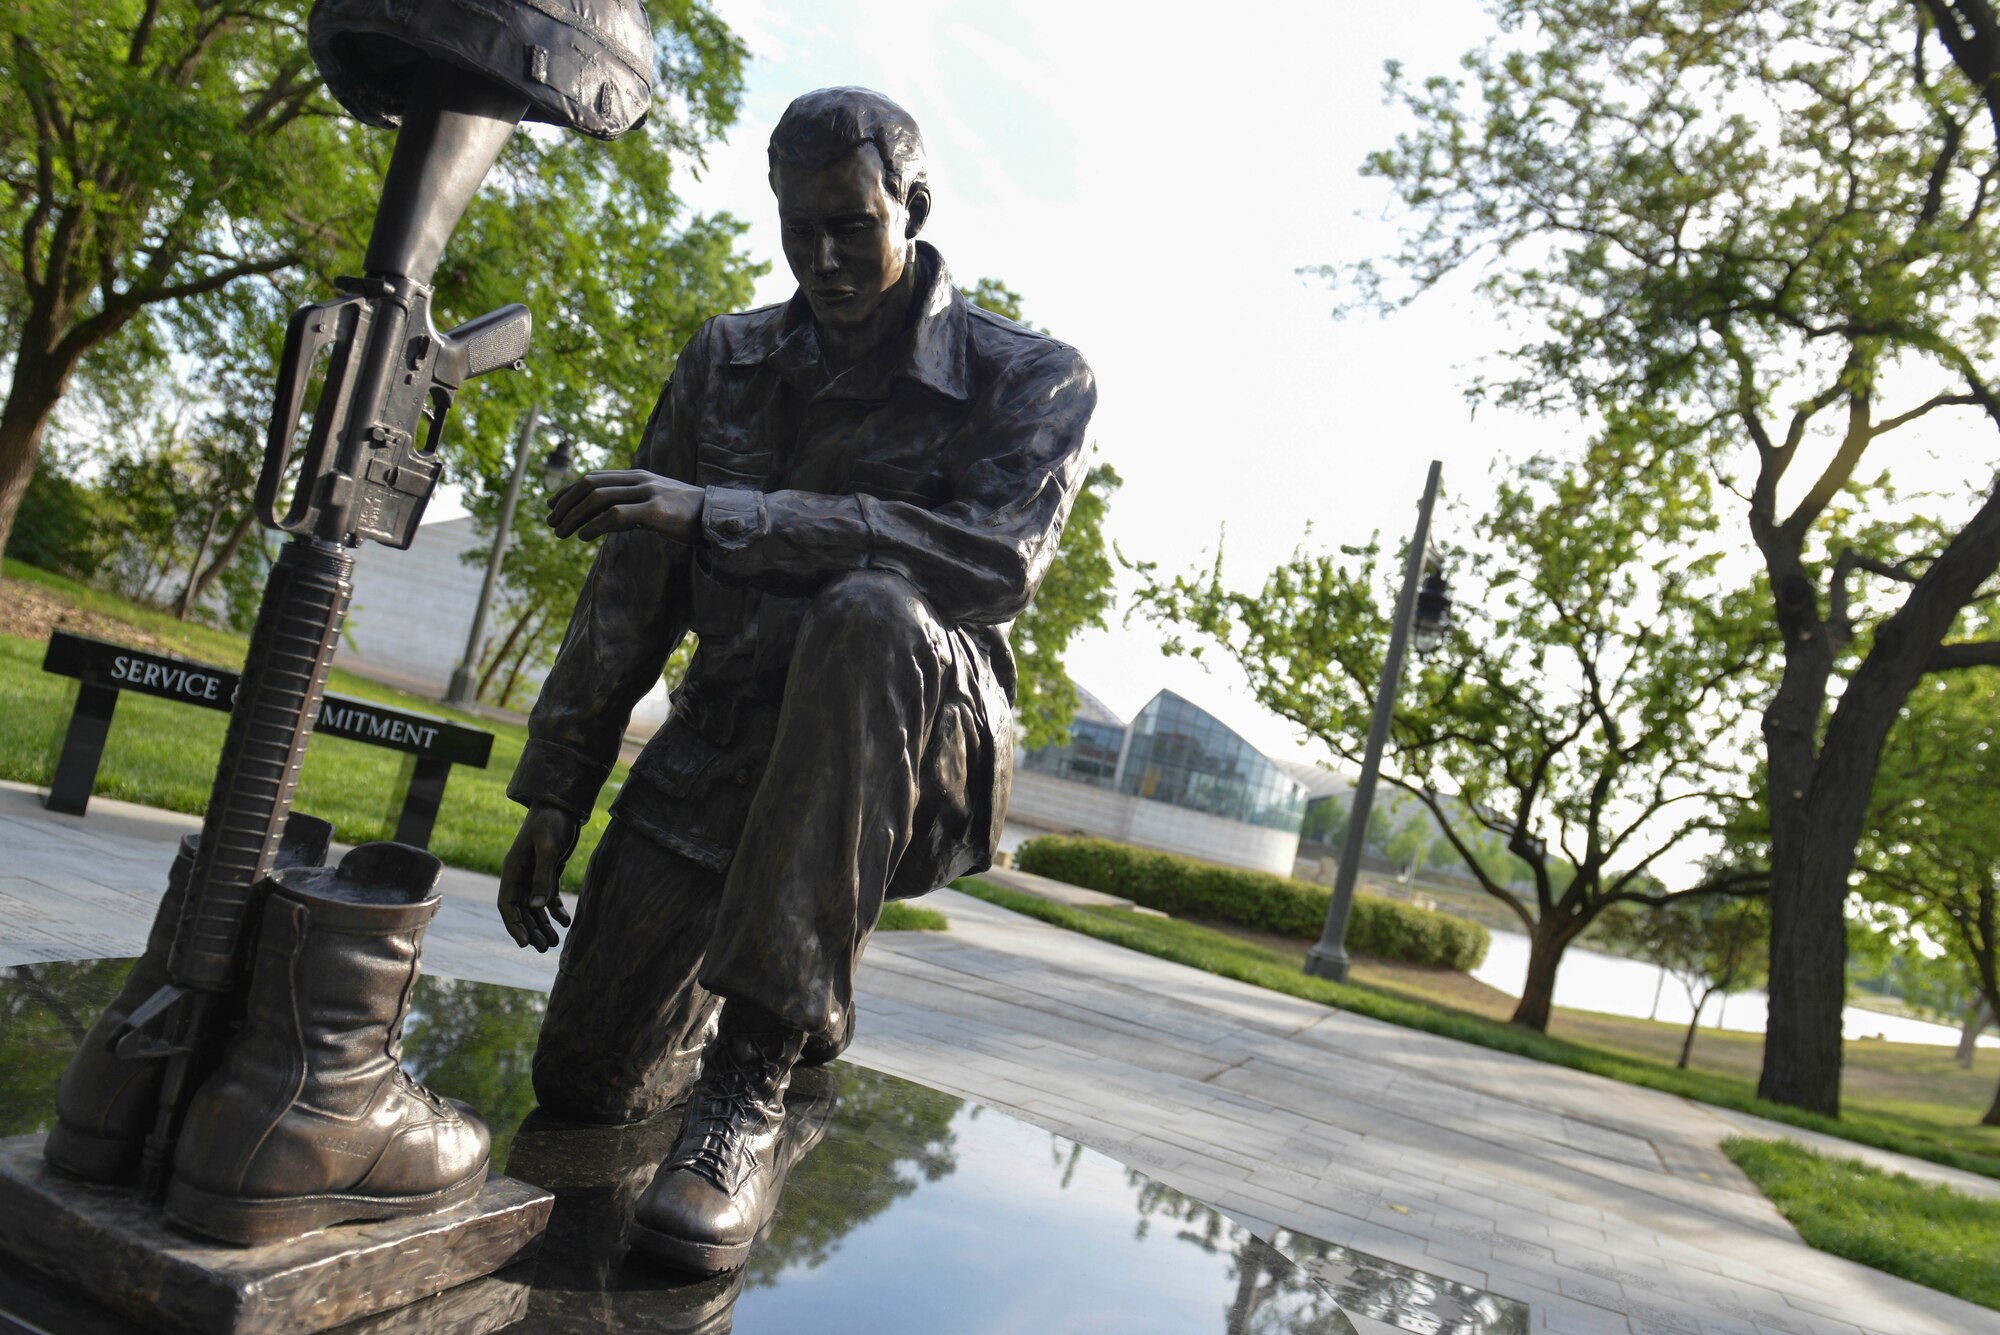 A bronze statue of a Soldier looking at a “battlefield cross” helps comprise the Operation Freedom Memorial in the Veteran’s Memorial Park, May 18, 2014, in Wichita, Kansas.  The monument is a symbol of tribute to Kansas fallen service members from Operation Desert Storm to current, ongoing conflicts in the war on terrorism and was built by the OFM Foundation, Inc. with donations and help of several local businesses and volunteers. (U.S. Air Force photo/Staff Sgt. Jess Lockoski) 